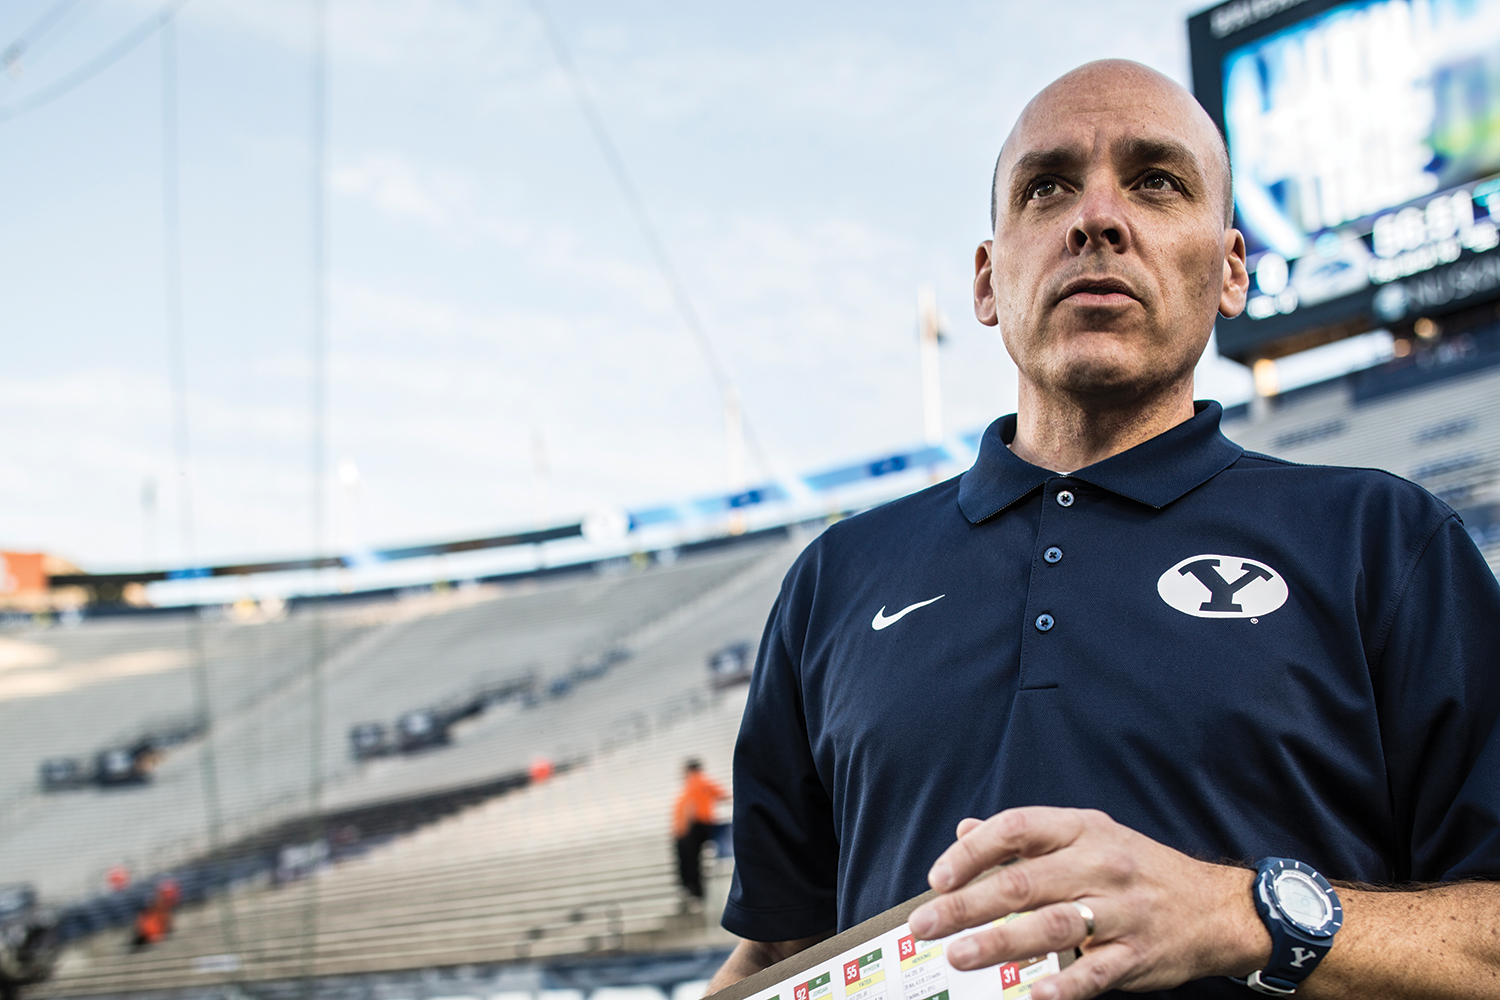 Greg Wrubell looks over the field before a football game with a serious look on his face